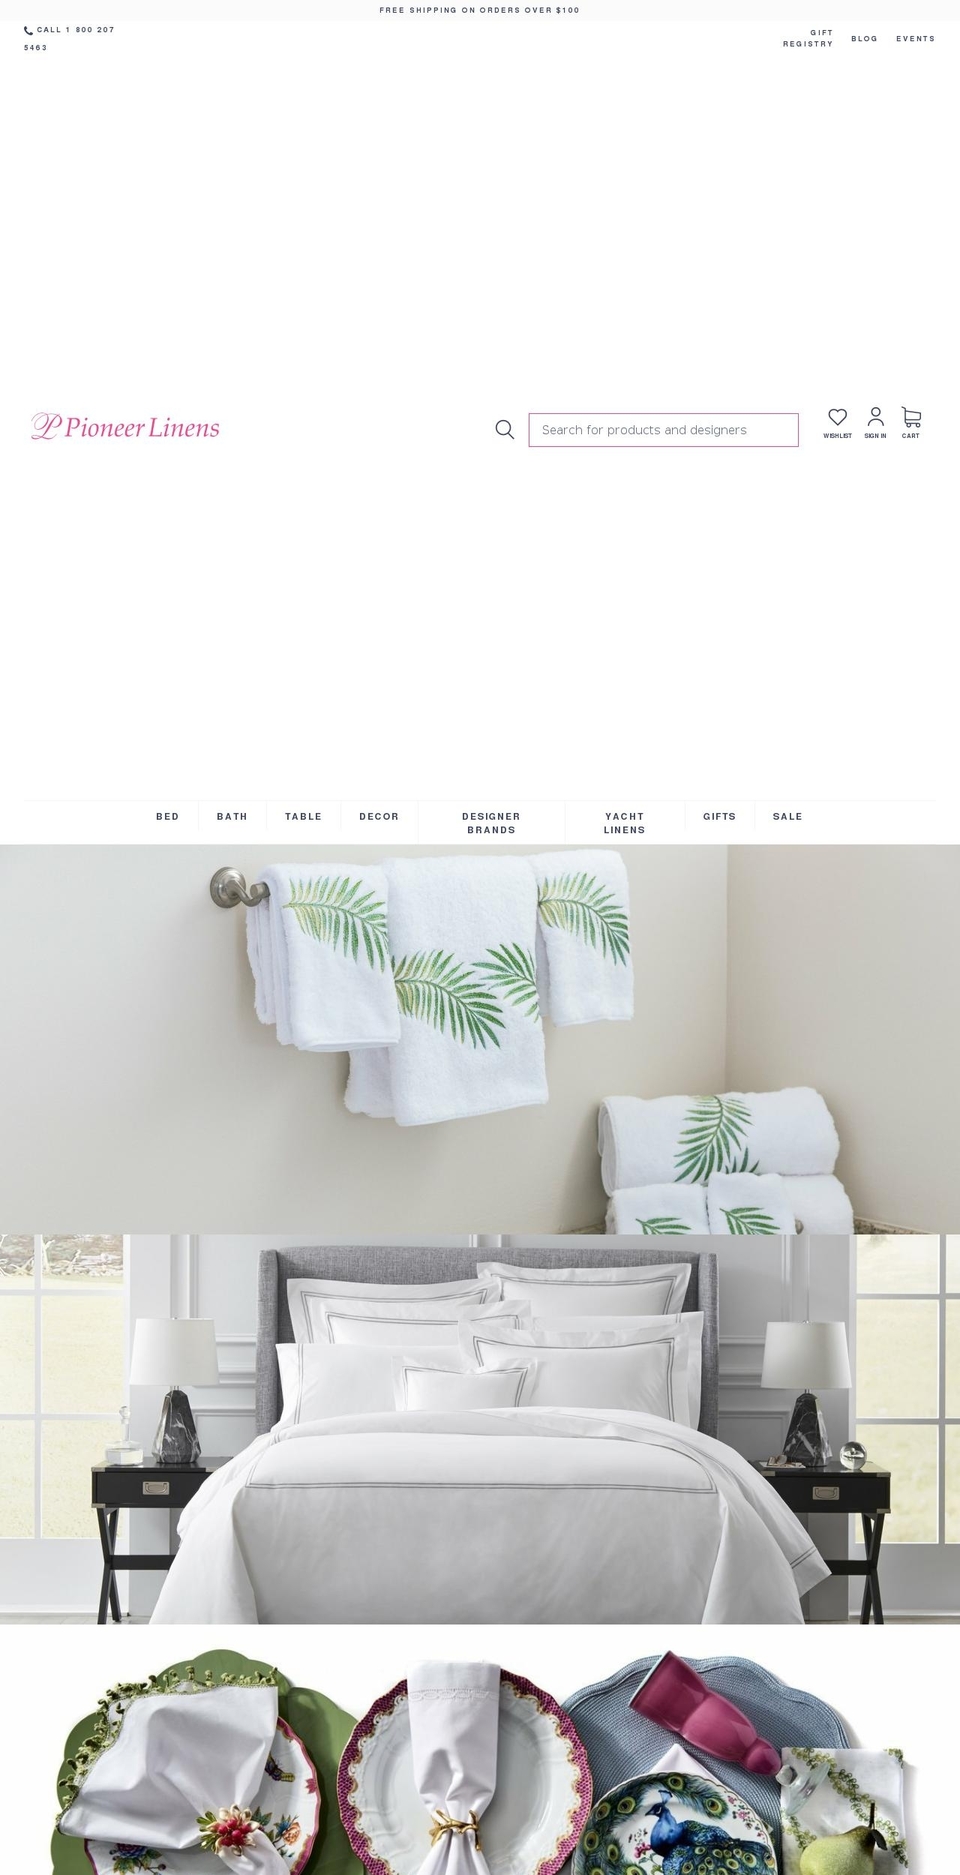 Buko Shopify Theme - Products Consolidation Shopify theme site example pioneeerlinens.com